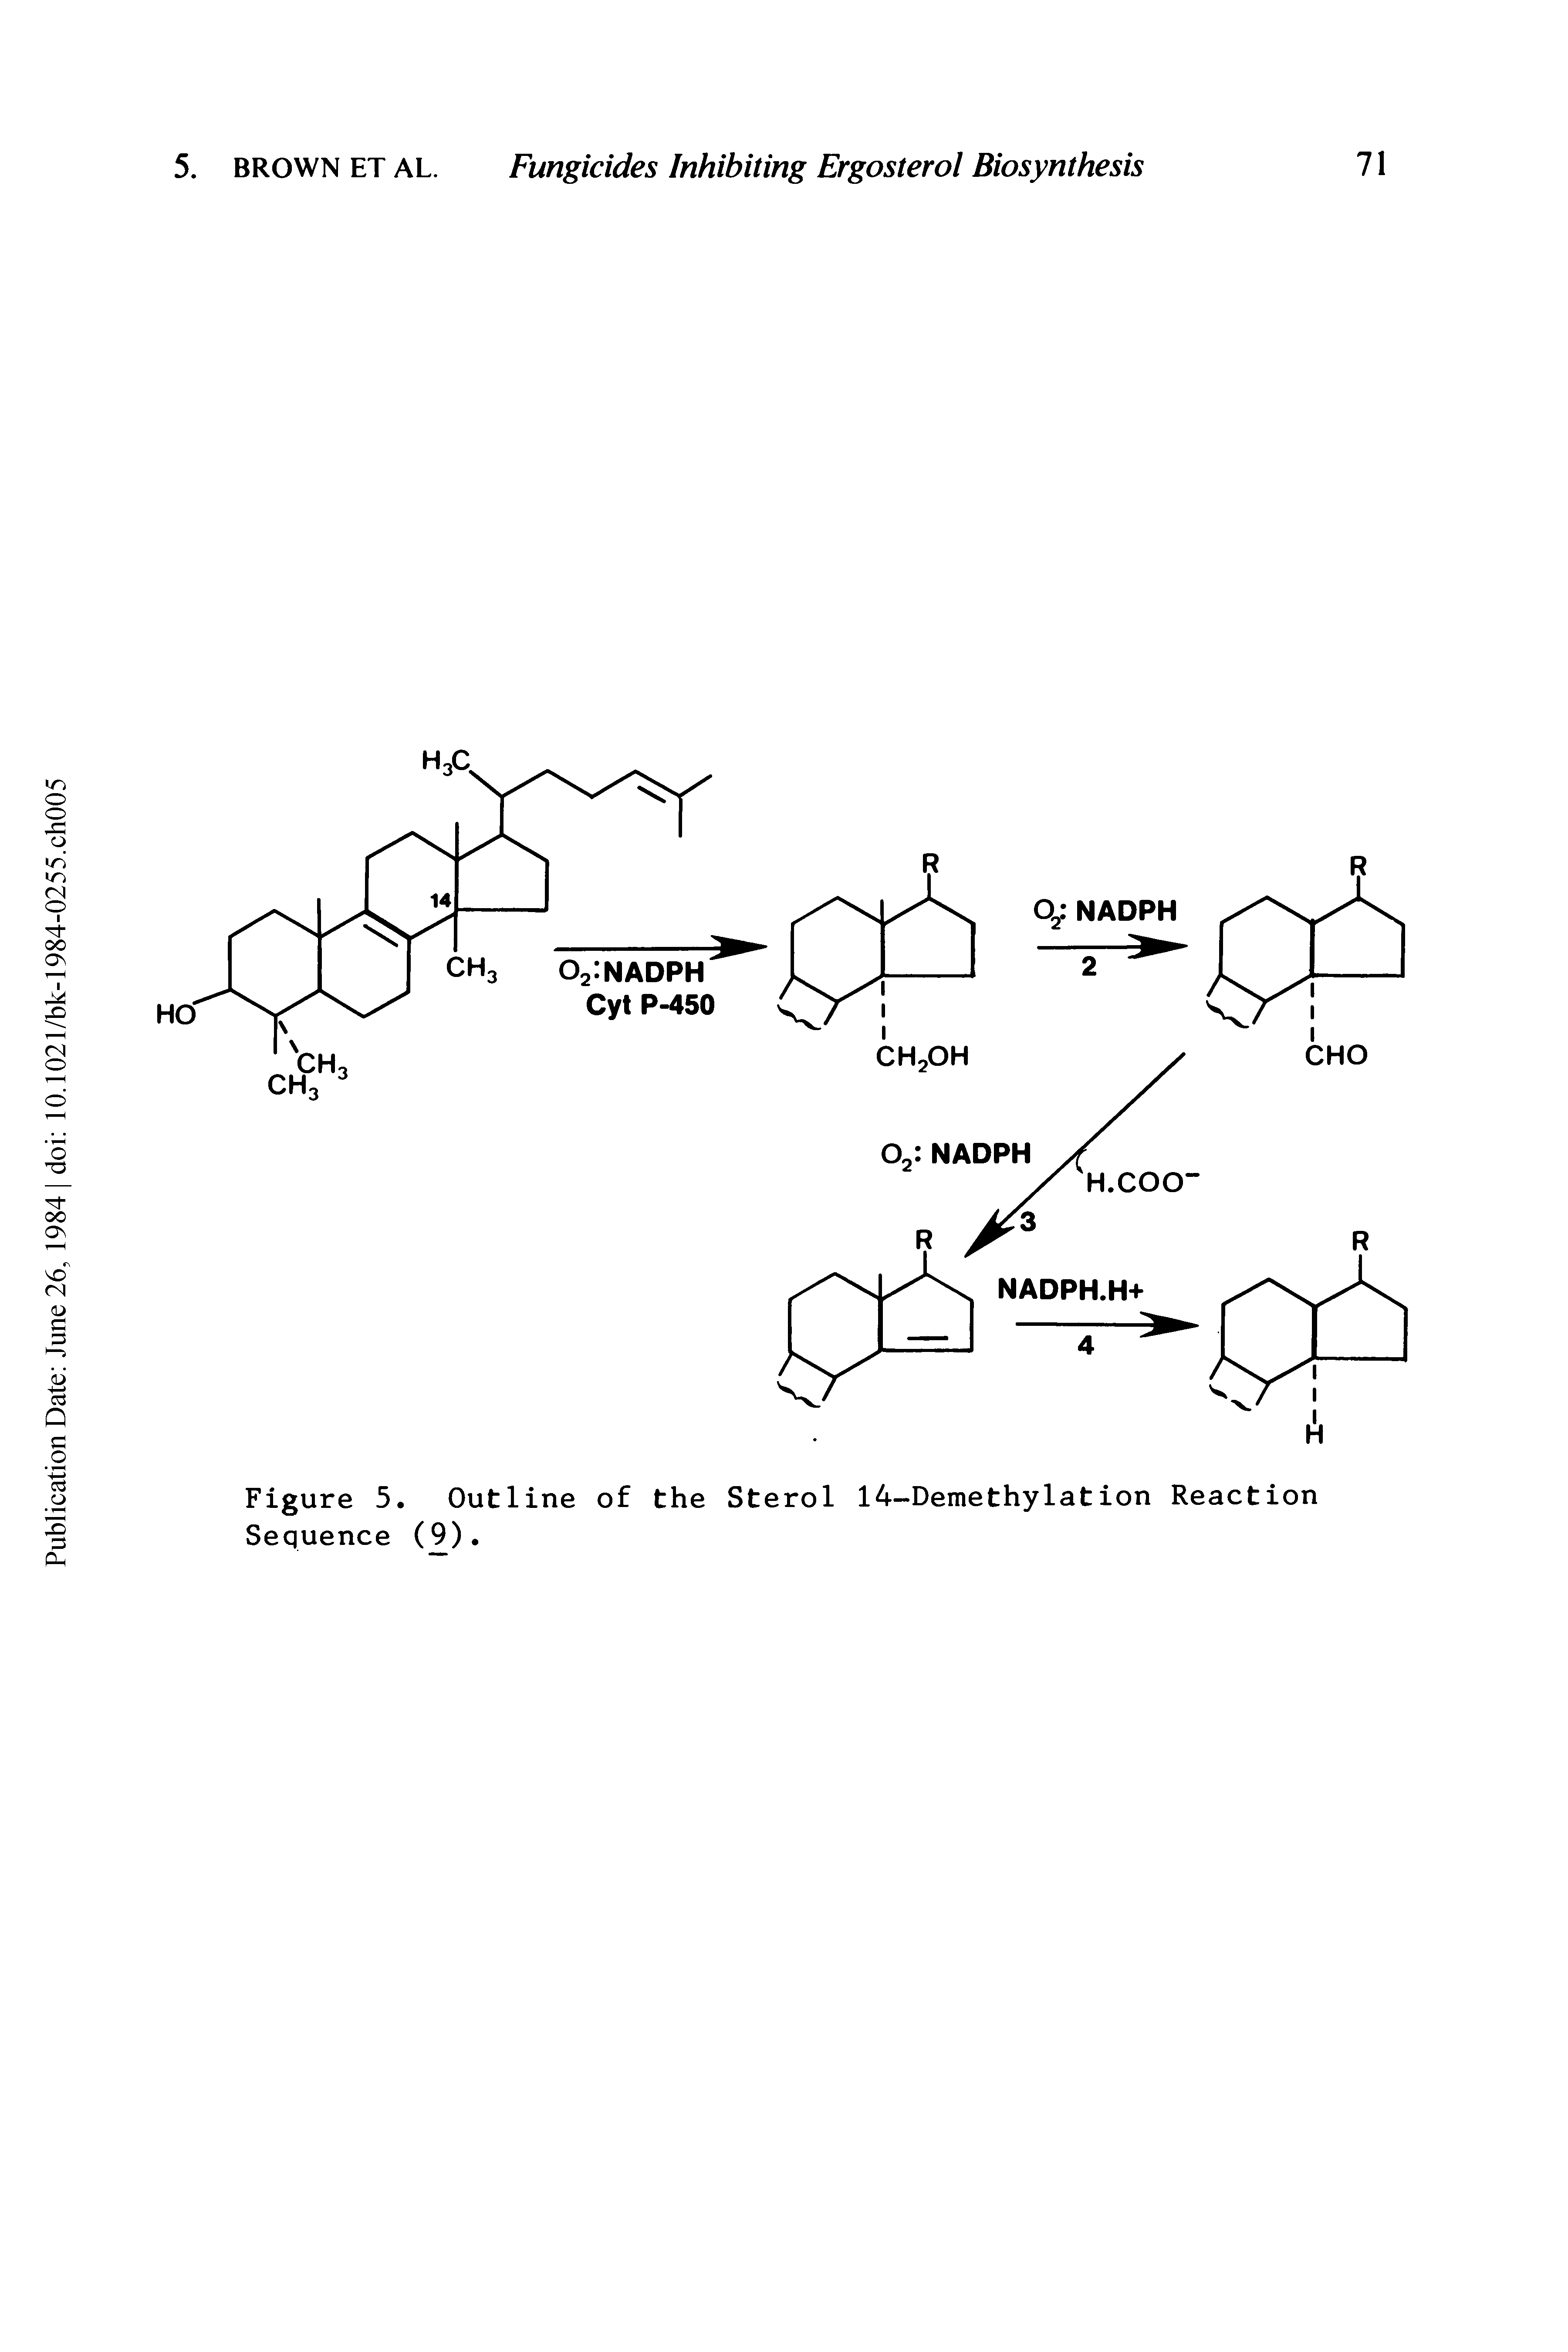 Figure 5. Outline of the Sterol 14 Demethylation Reaction Sequence (9).